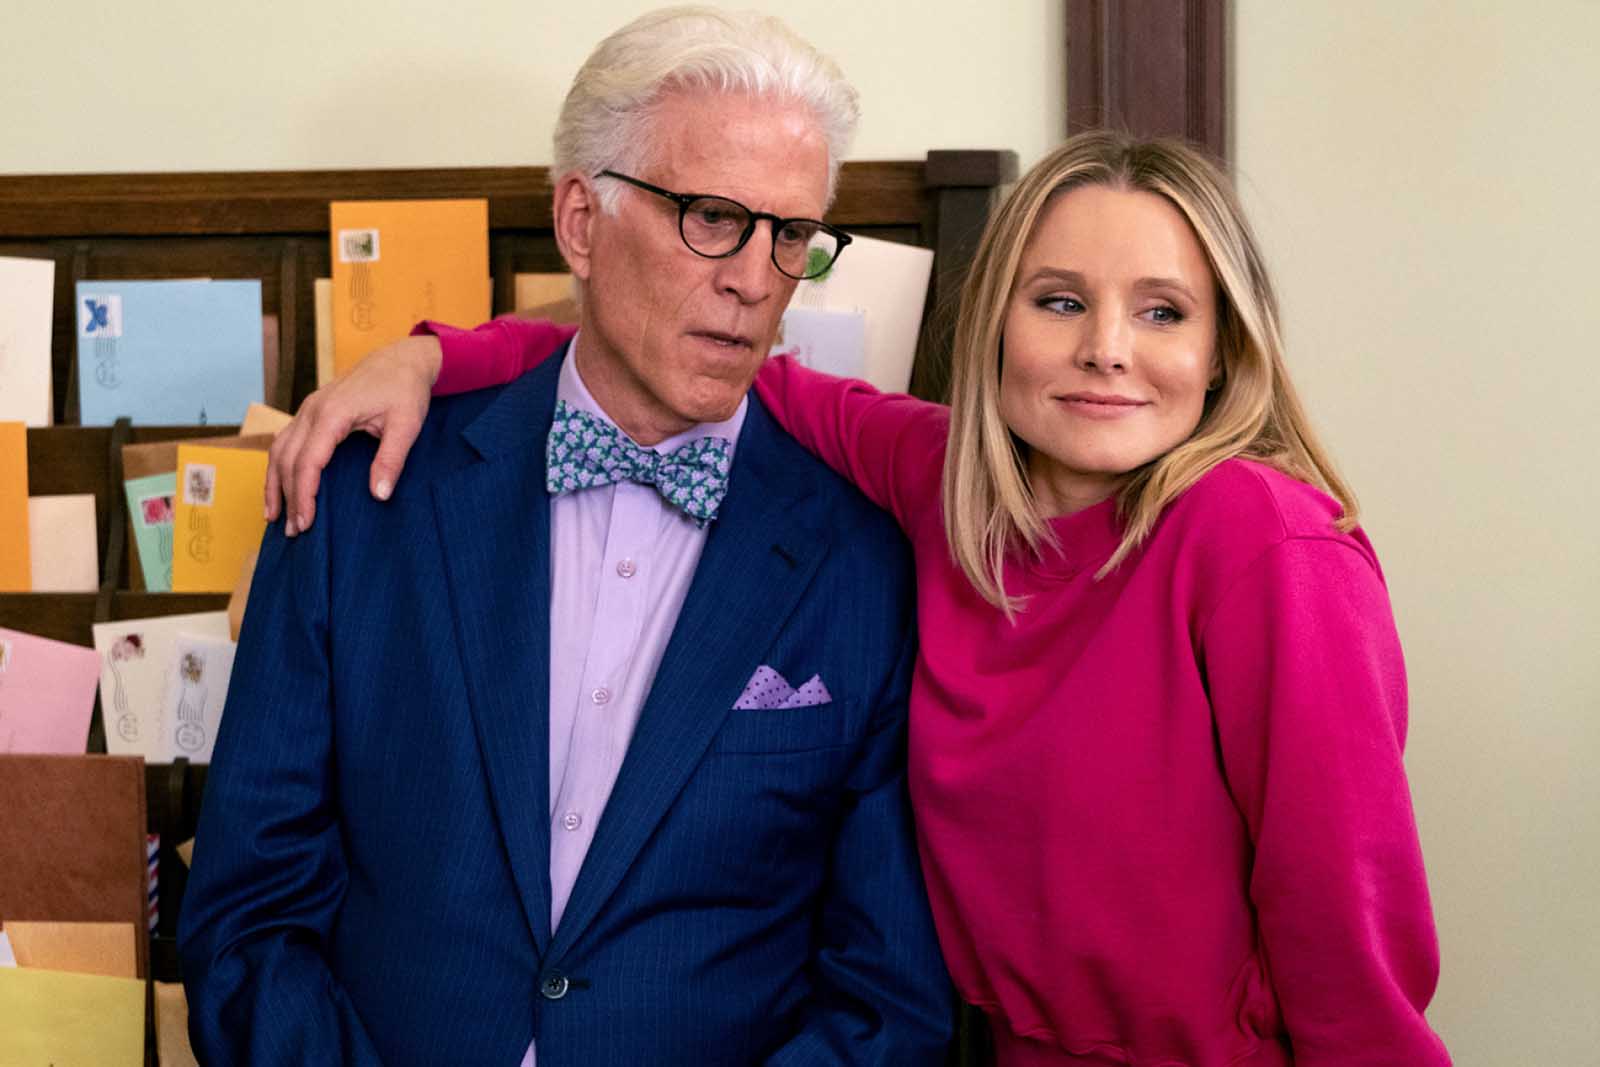 2020 is a mess ya'll, and we're hoping our dear "Soul Squad" can save us all. Mainly, the squad that helped save the world in 'The Good Place' season 3.